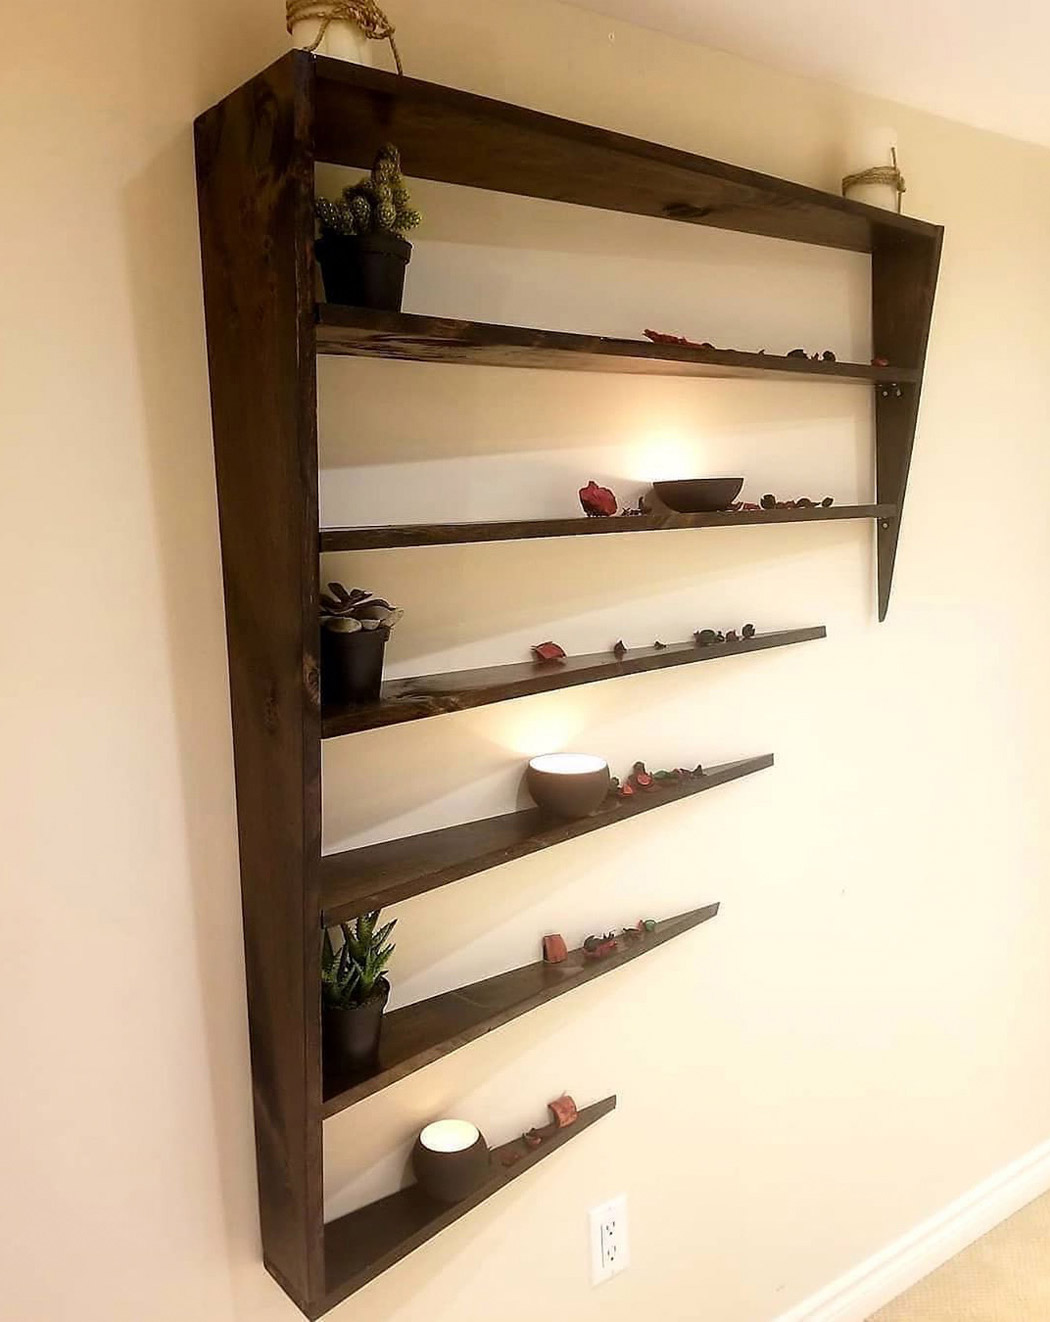 Illusion Shelf Disappearing Into Wall - By Soheil Yousefi